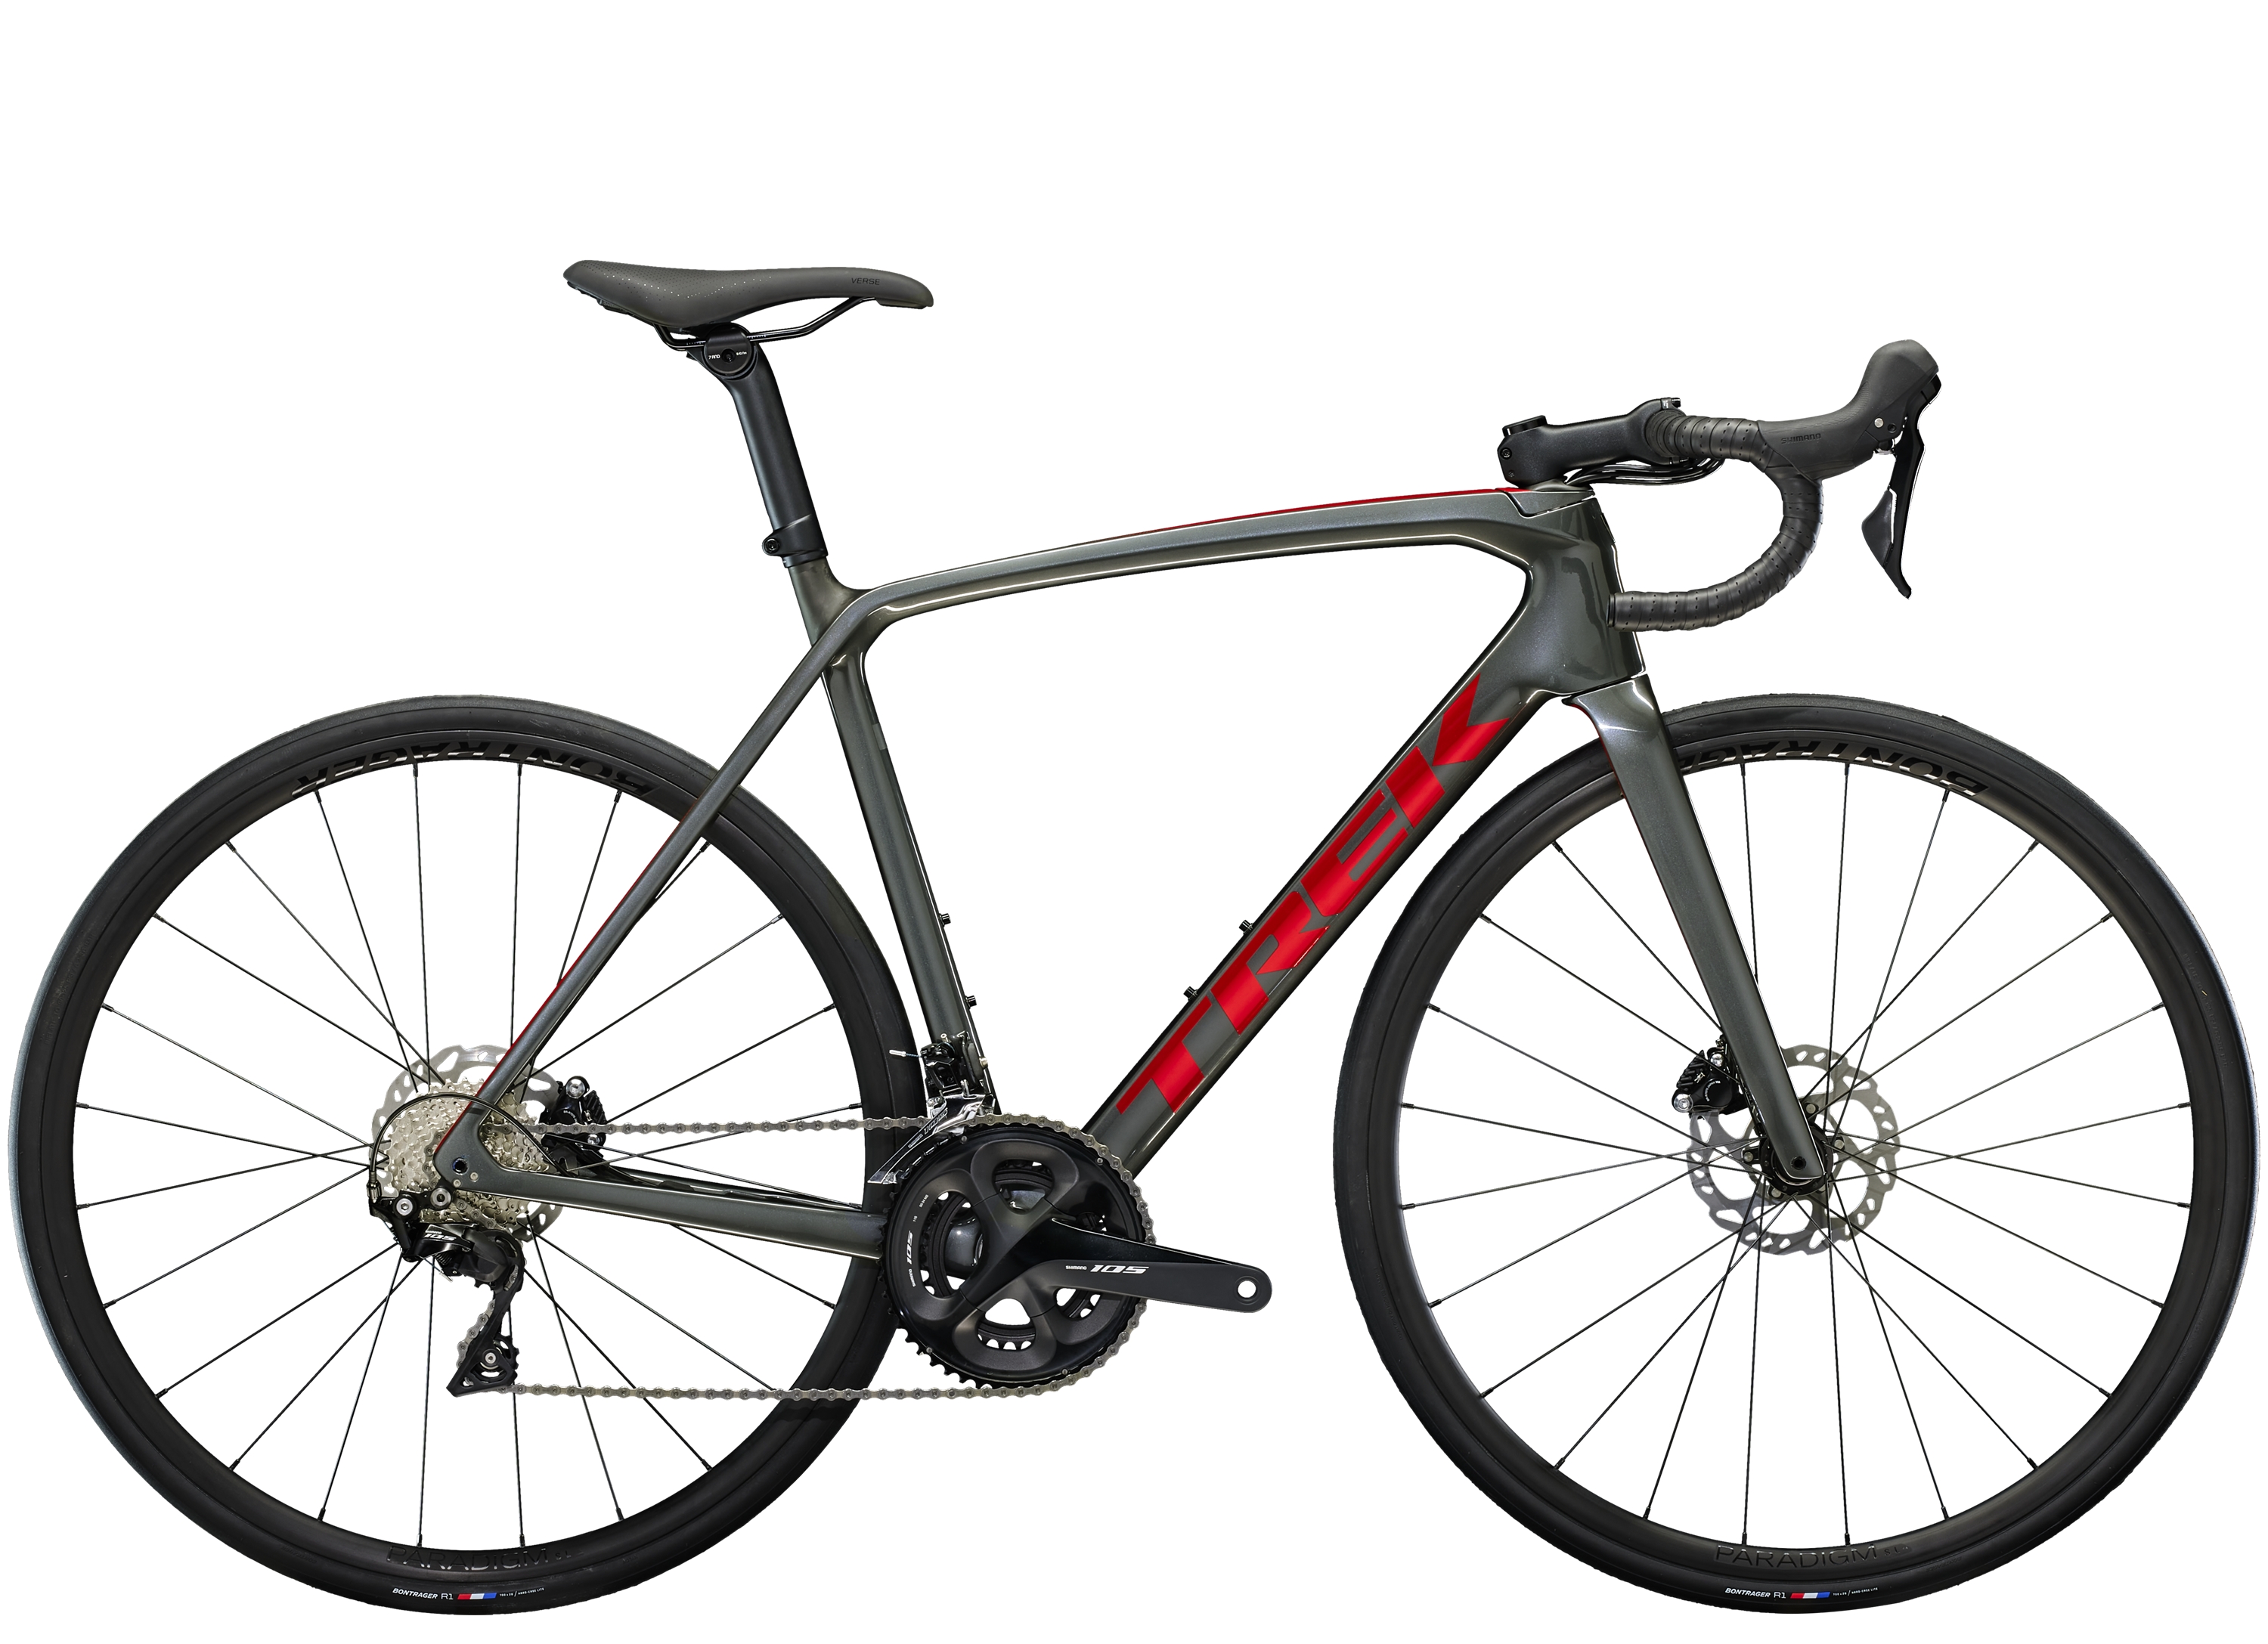 <a href="https://cycles-clement.be/product/emonda-sl-5-50-lithium-grey/">EMONDA SL 5 50 LITHIUM GREY</a>